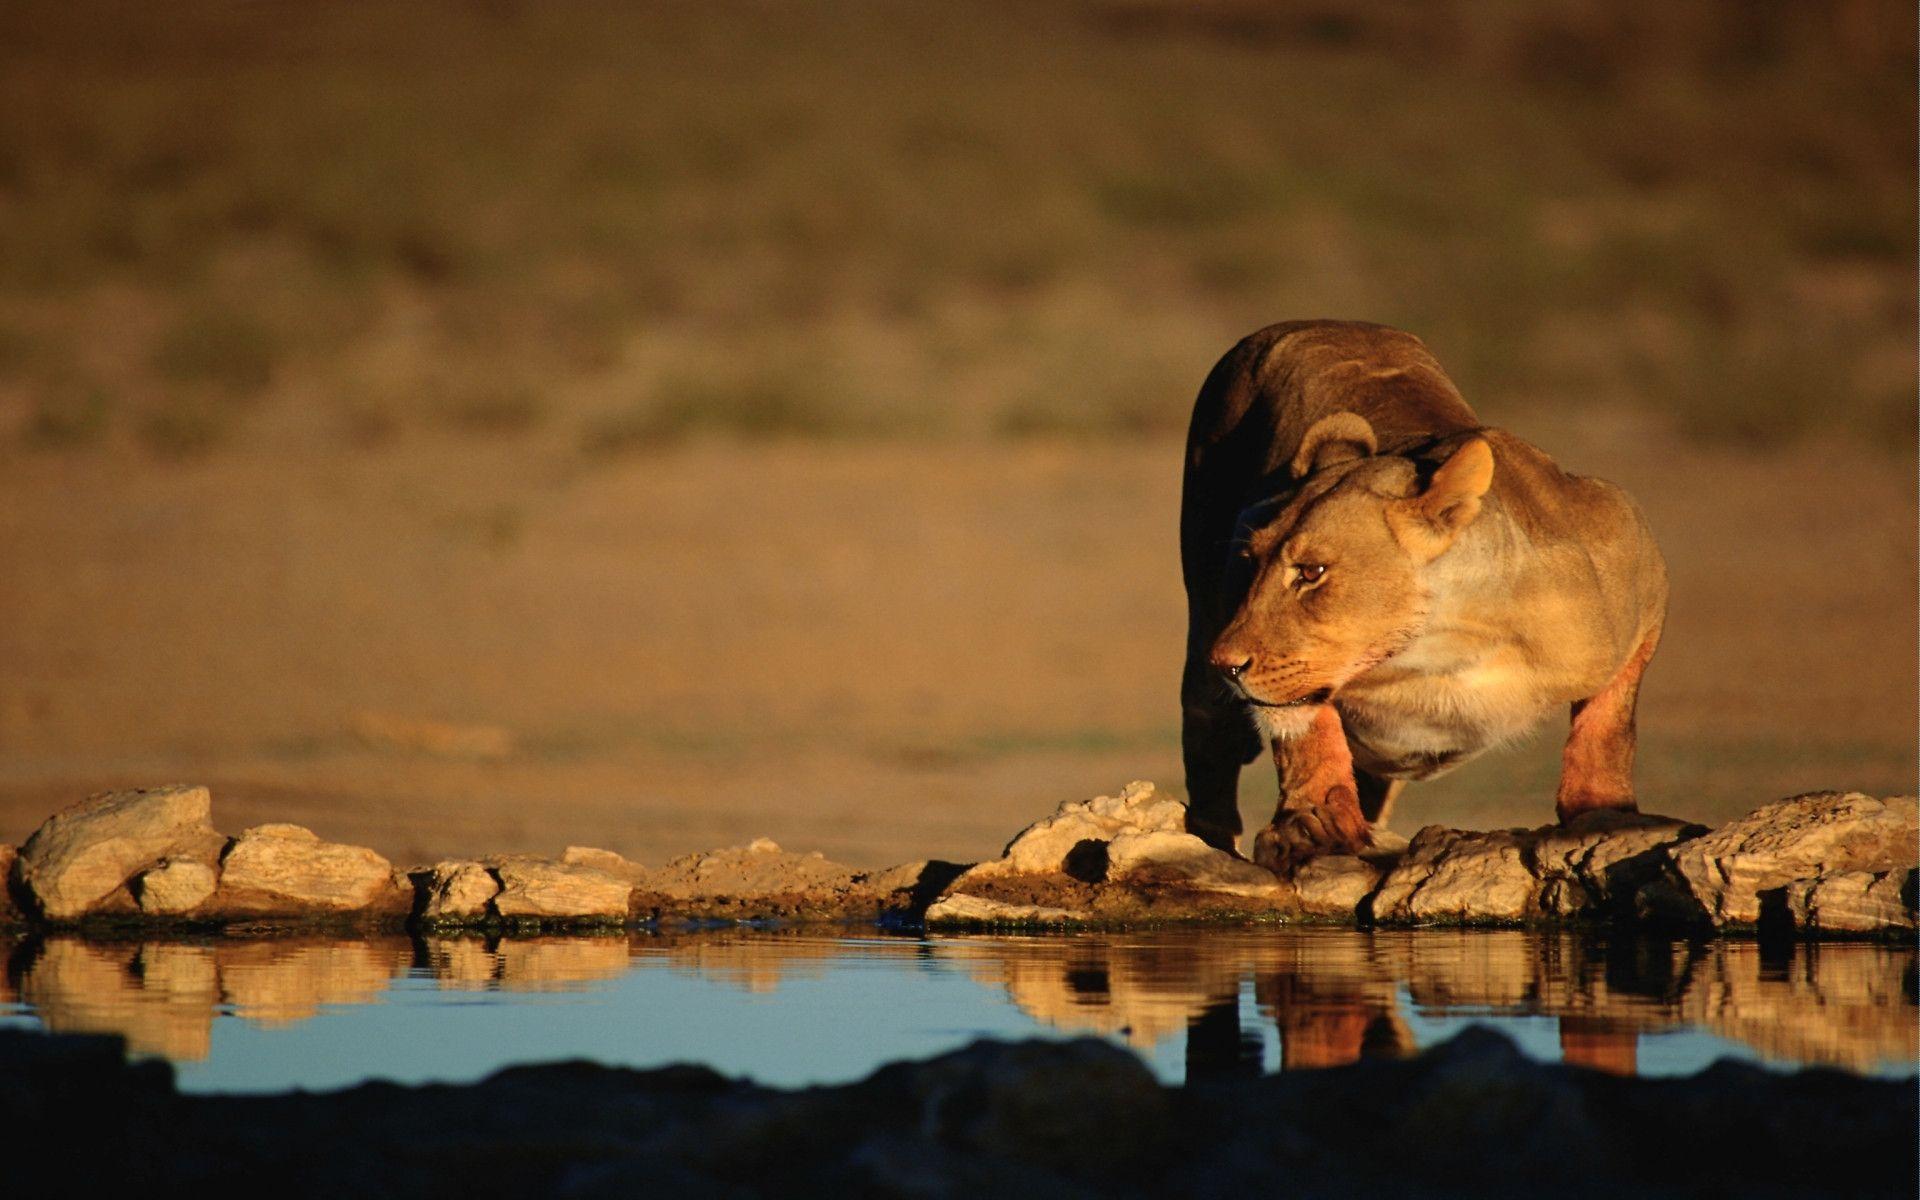 Lioness Water Break High Quality Wallpaper, HQ Background. HD